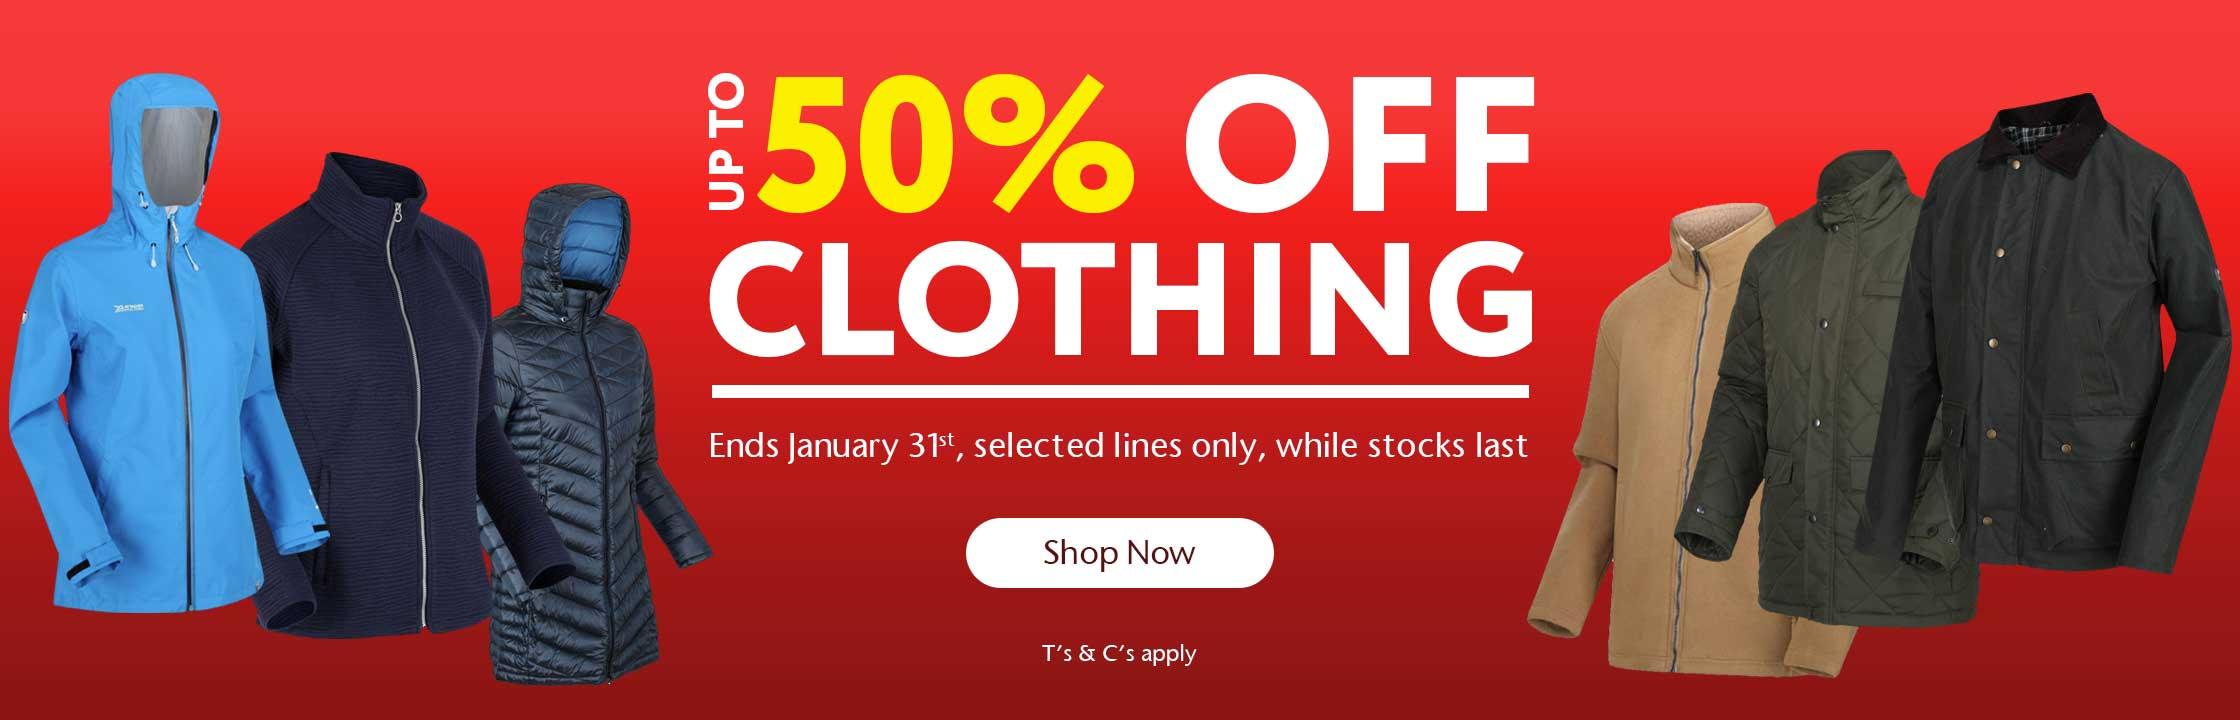 Up to 50% OFF Clothing 